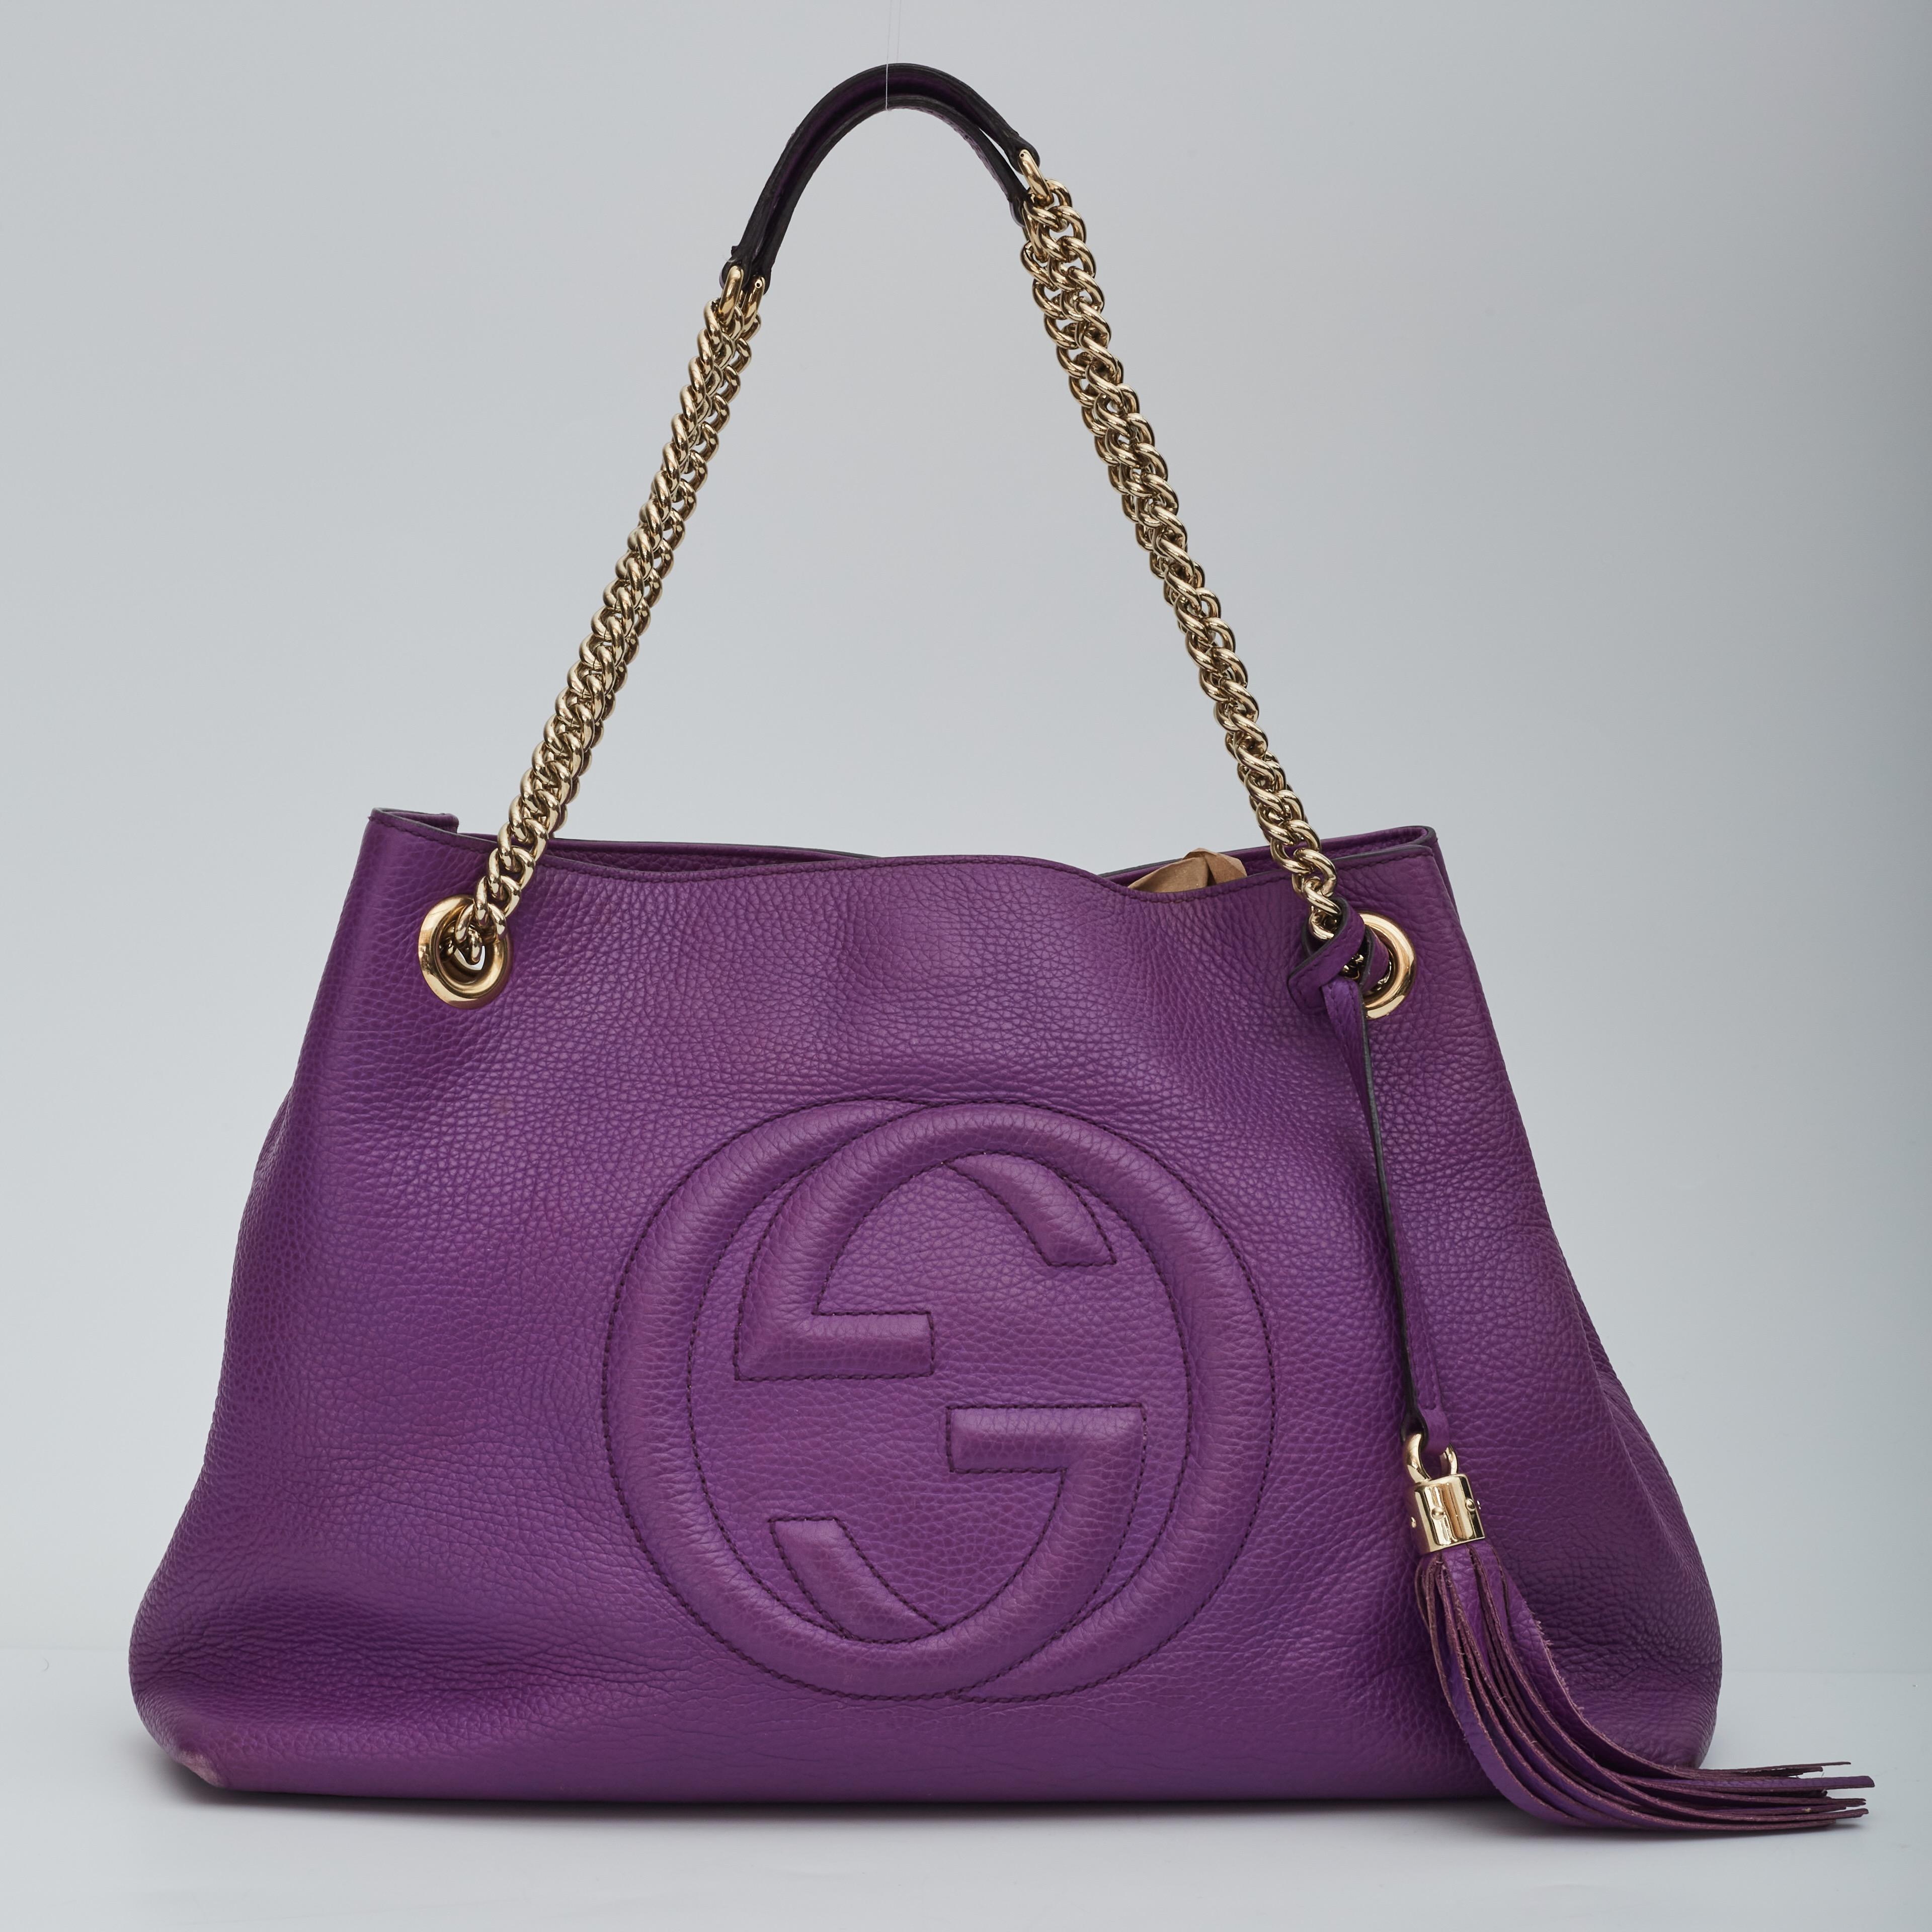 This shoulder bag is made of textured calfskin leather in purple. The bag features a prominent front interlocking GG quilted logo, polished light gold chain link shoulder straps with shoulder pads and a decorative light gold knobbed tassel. The top